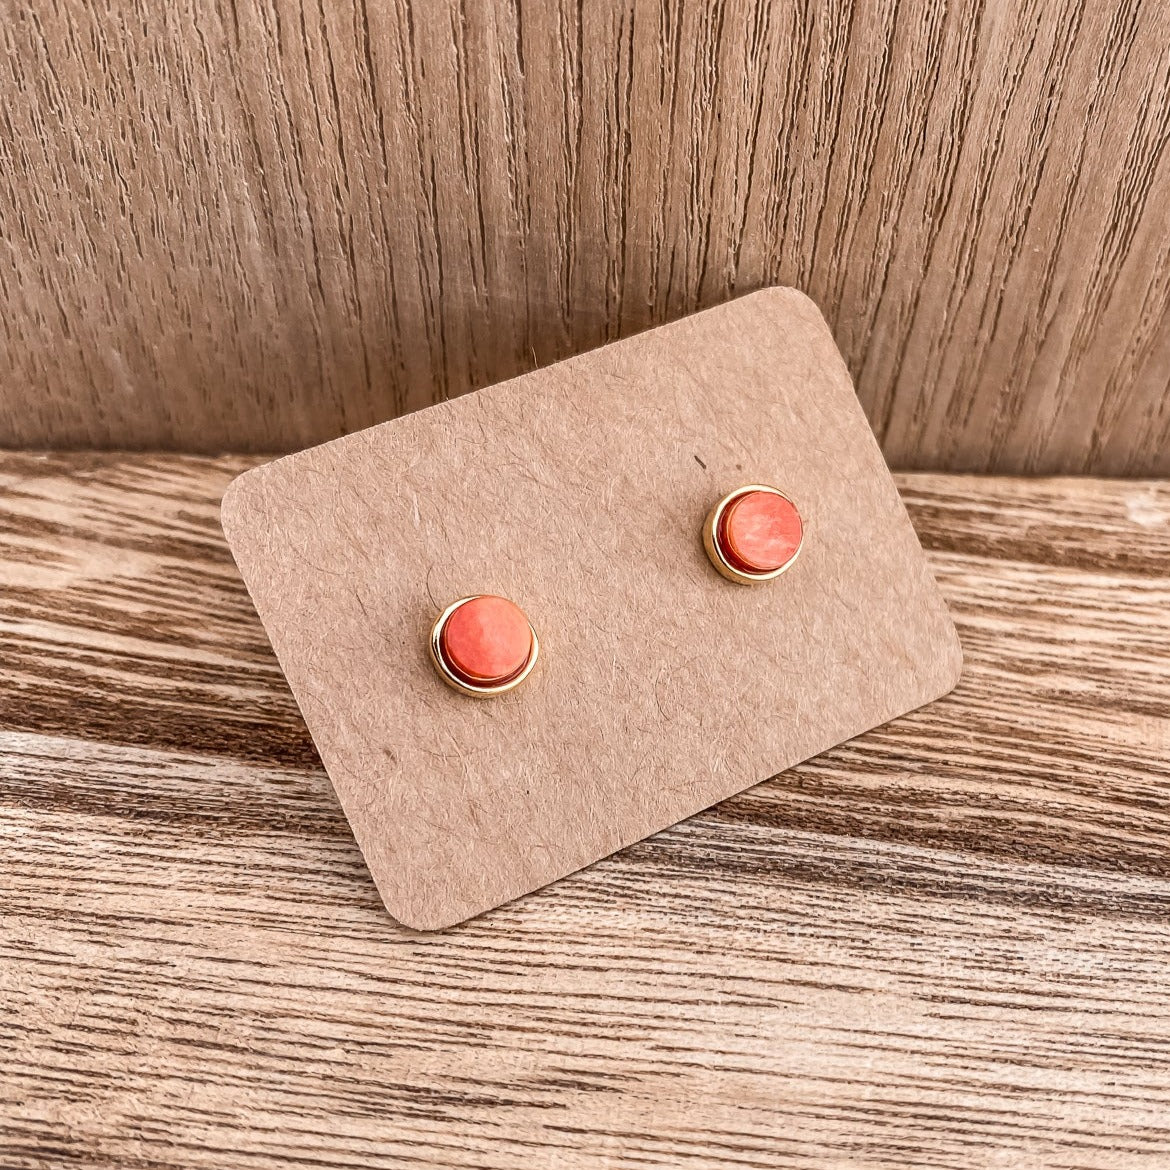 5mm Round Stud Yellow Gold Plated Earrings in Orange Dyed Feldspar Natural Gemstone Made by Born to Rock. Online Jewelry Based in San Diego California